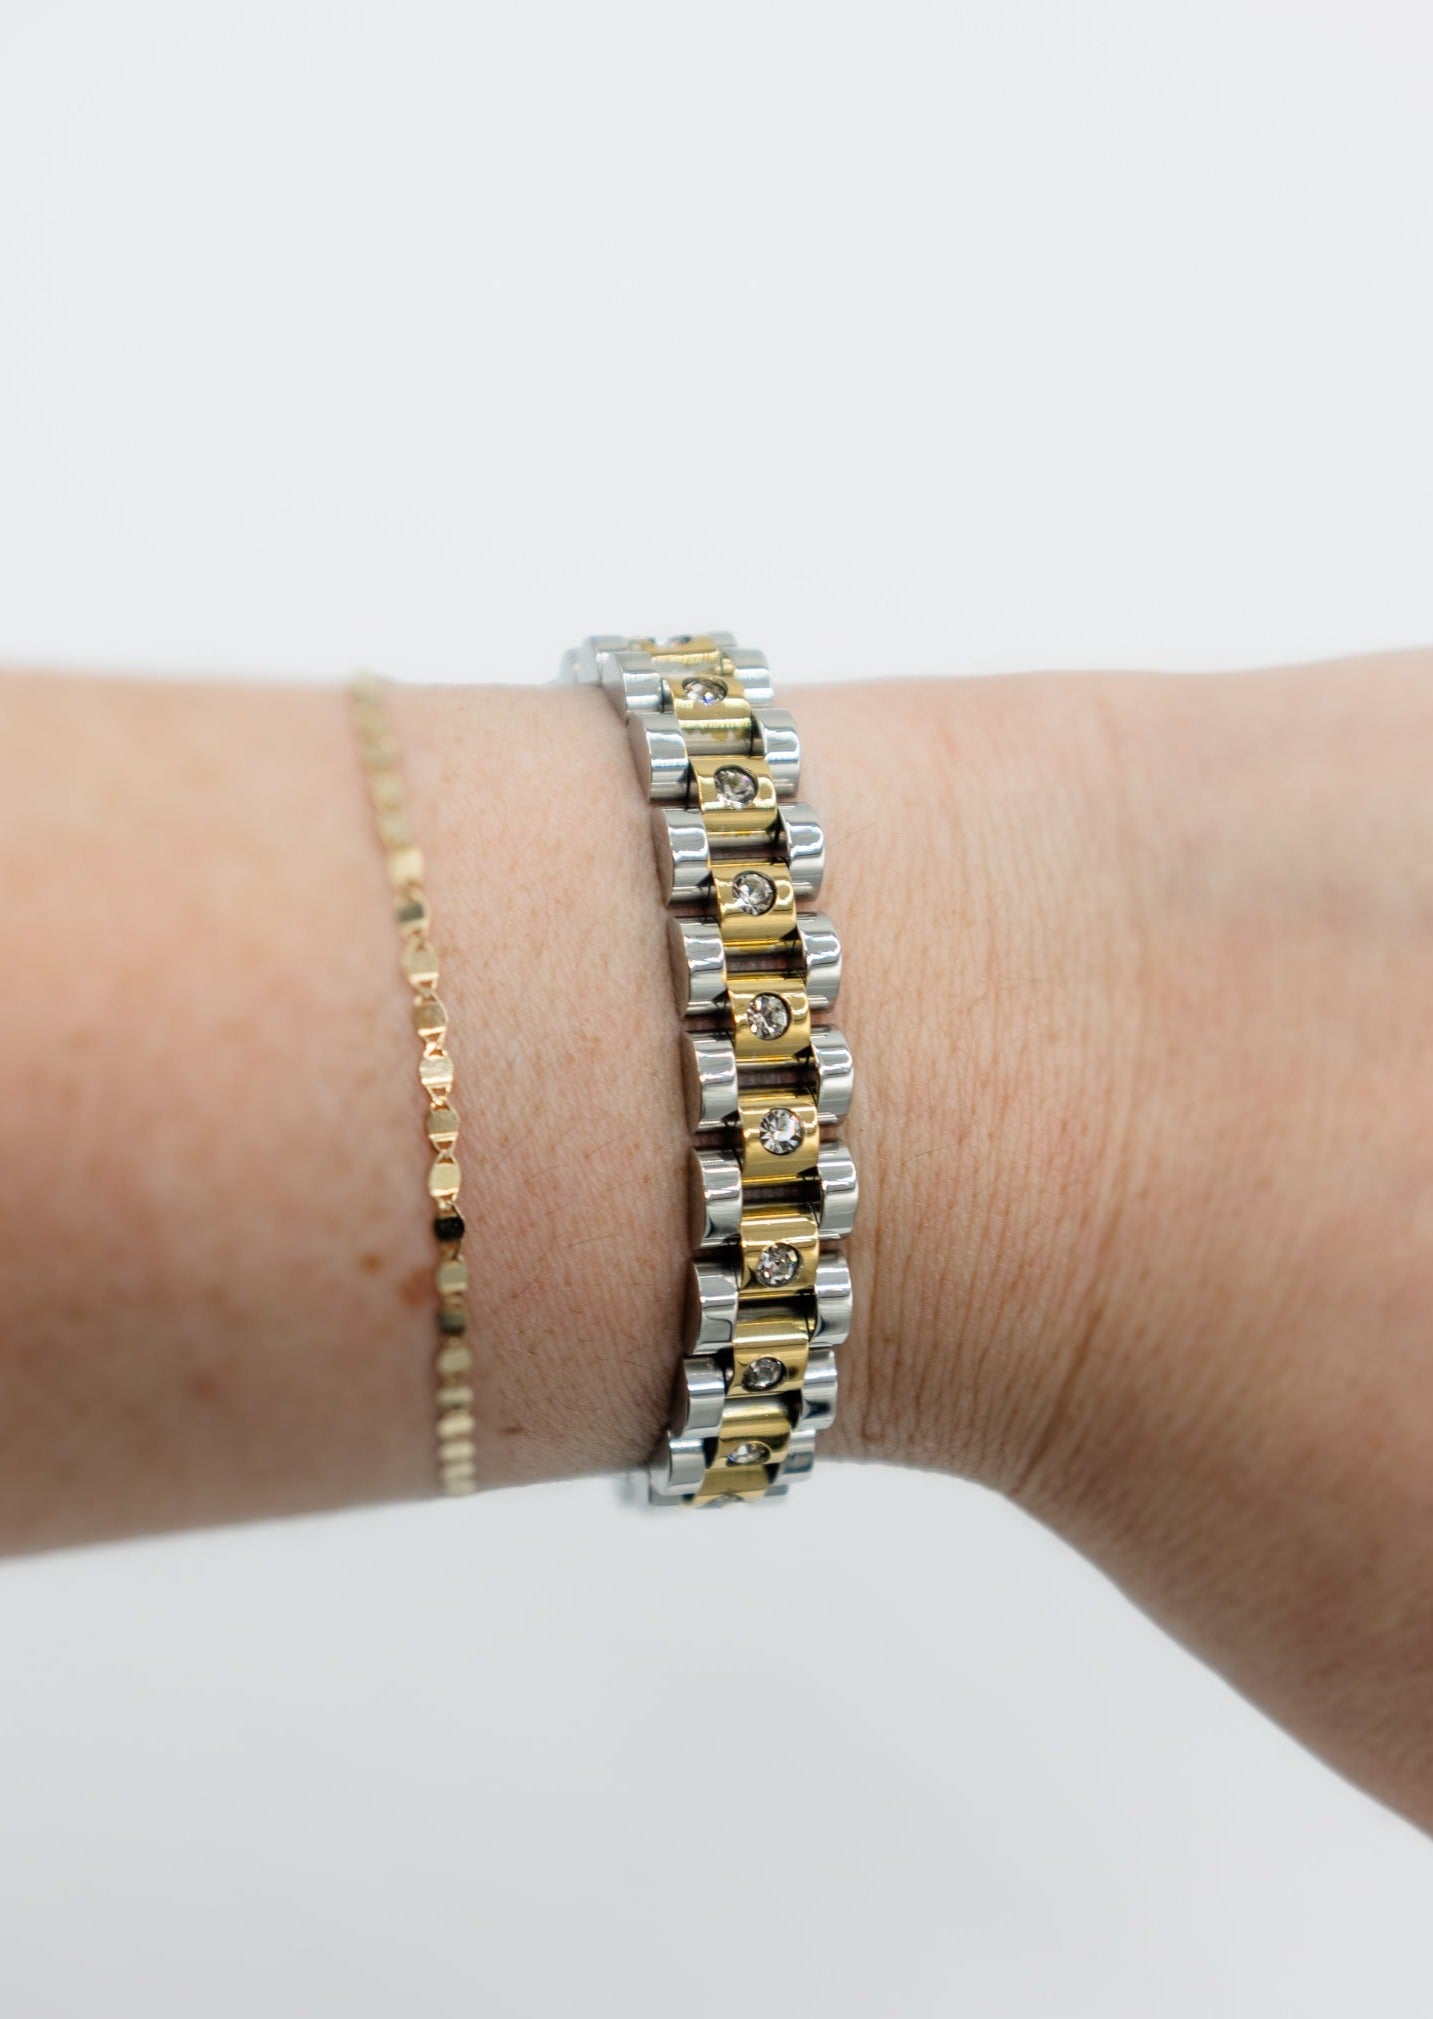 The Diamond Two-Toned Watch Band Bracelet